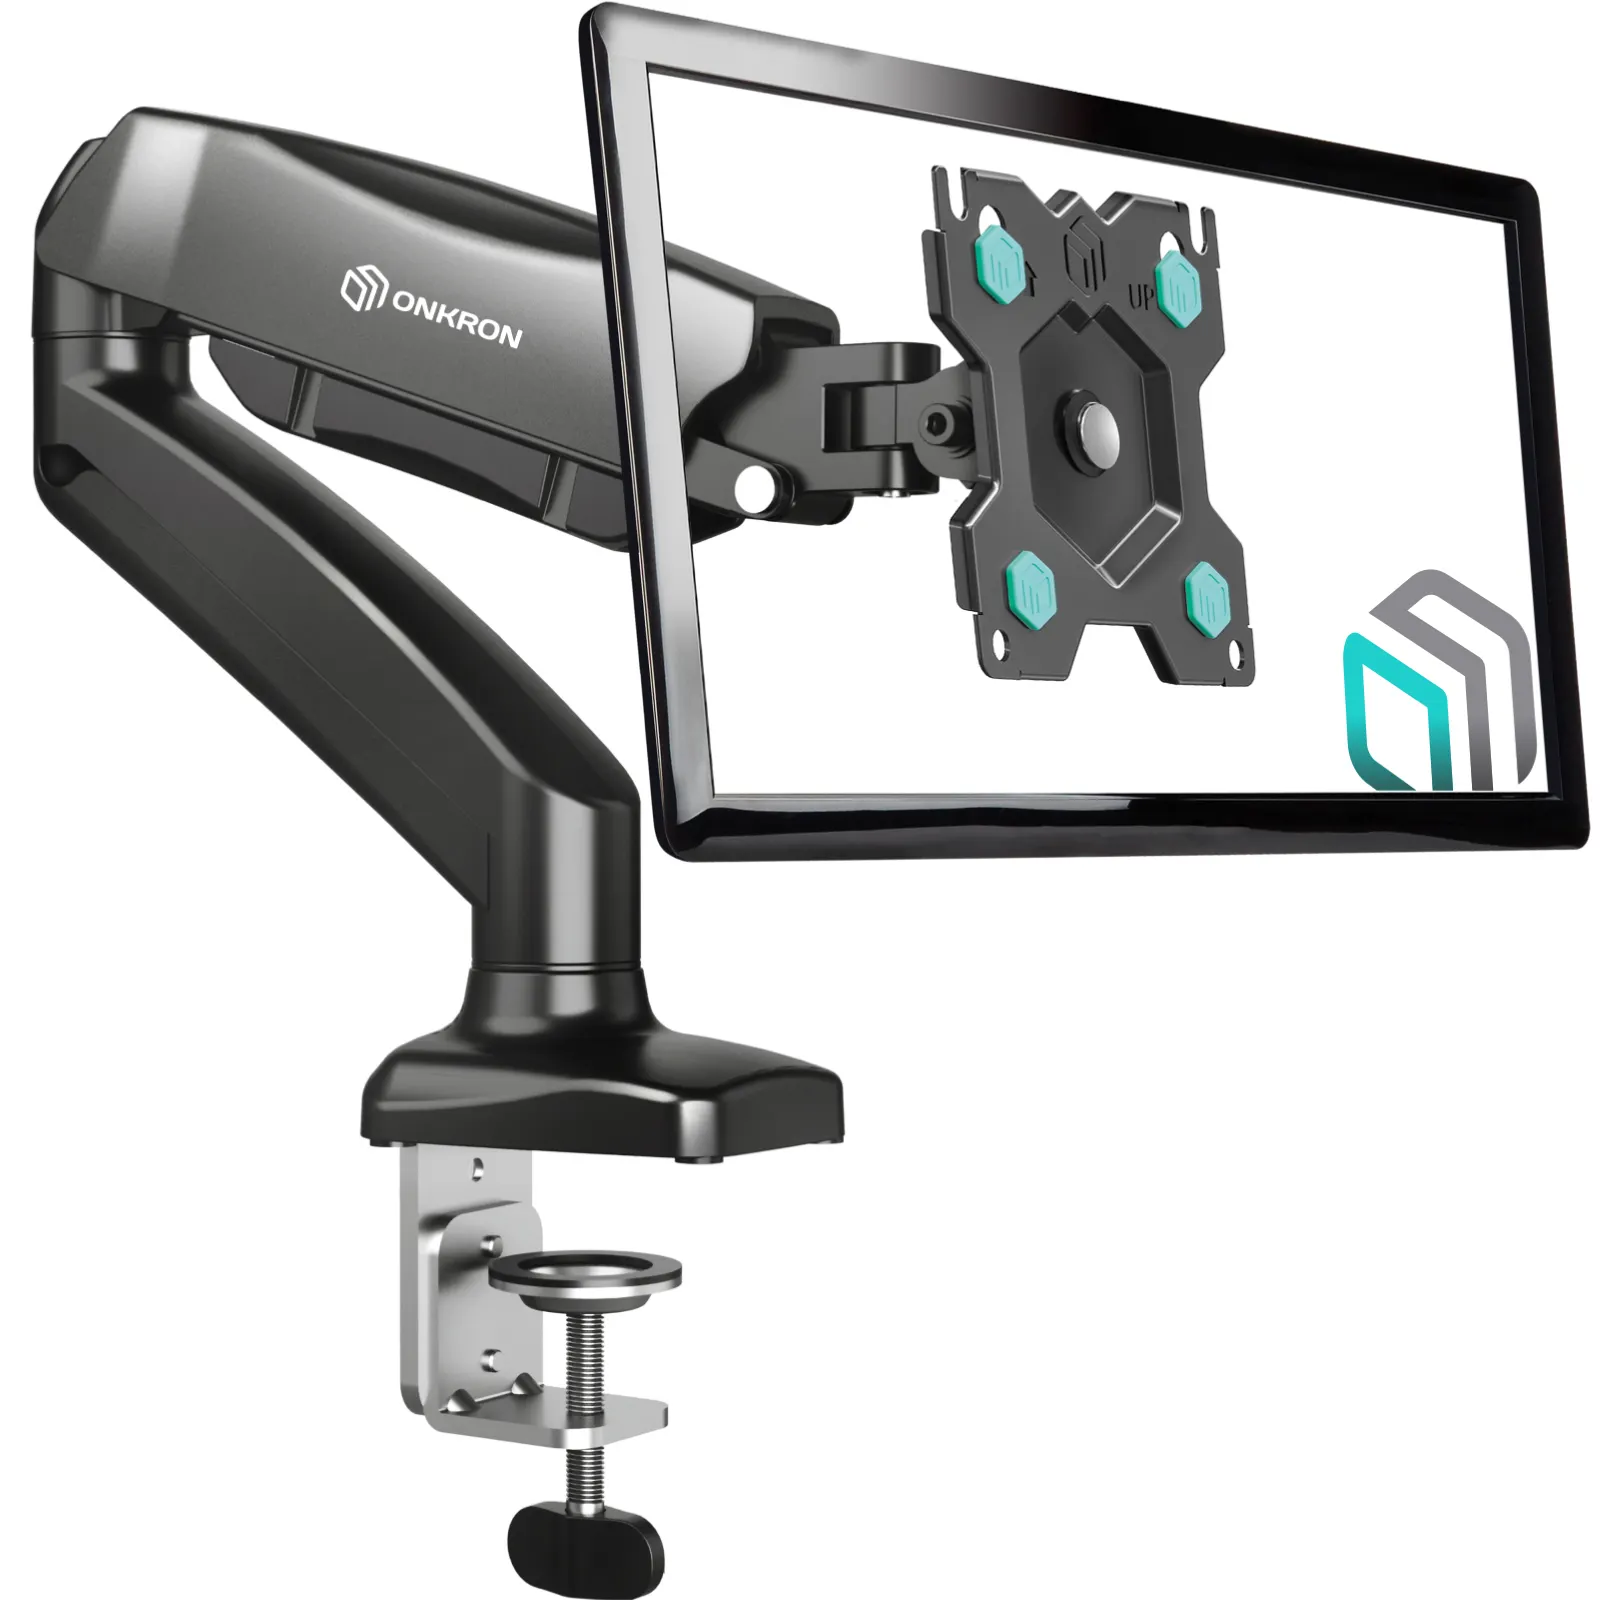 ONKRON Desk Monitor Mount Stand for 13" - 32 LCD LED OLED Computer Screens Full Motion Mounting Arm up to 17.6 lbs G80 Black